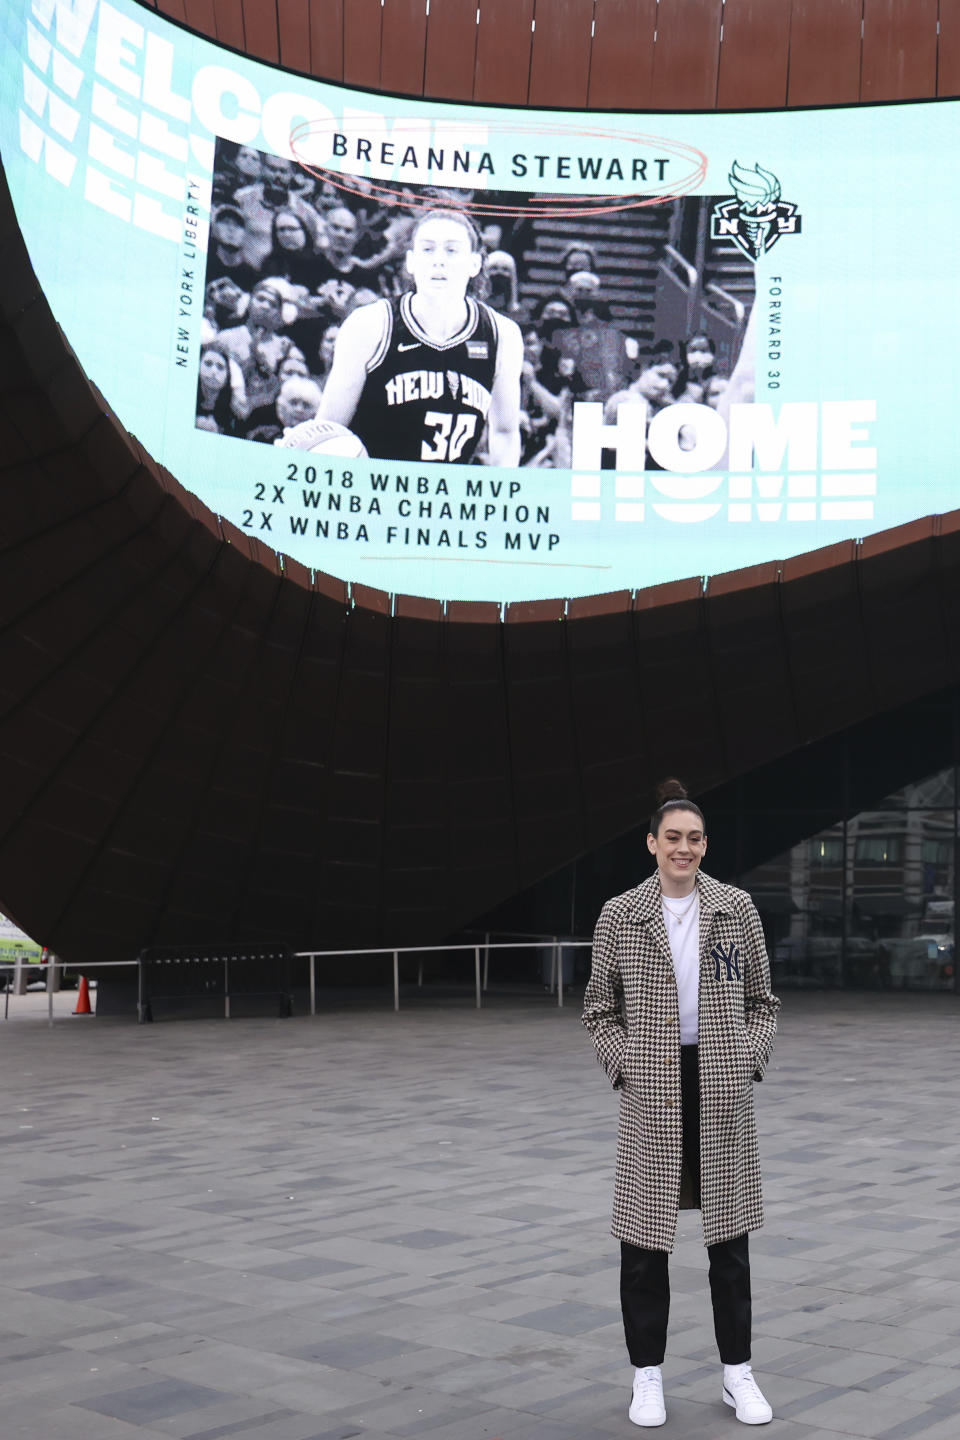 New York Liberty forward Breanna Stewart poses in front of Barclays Center before a WNBA basketball news conference, Thursday, Feb. 9, 2023, in New York. (AP Photo/Jessie Alcheh)